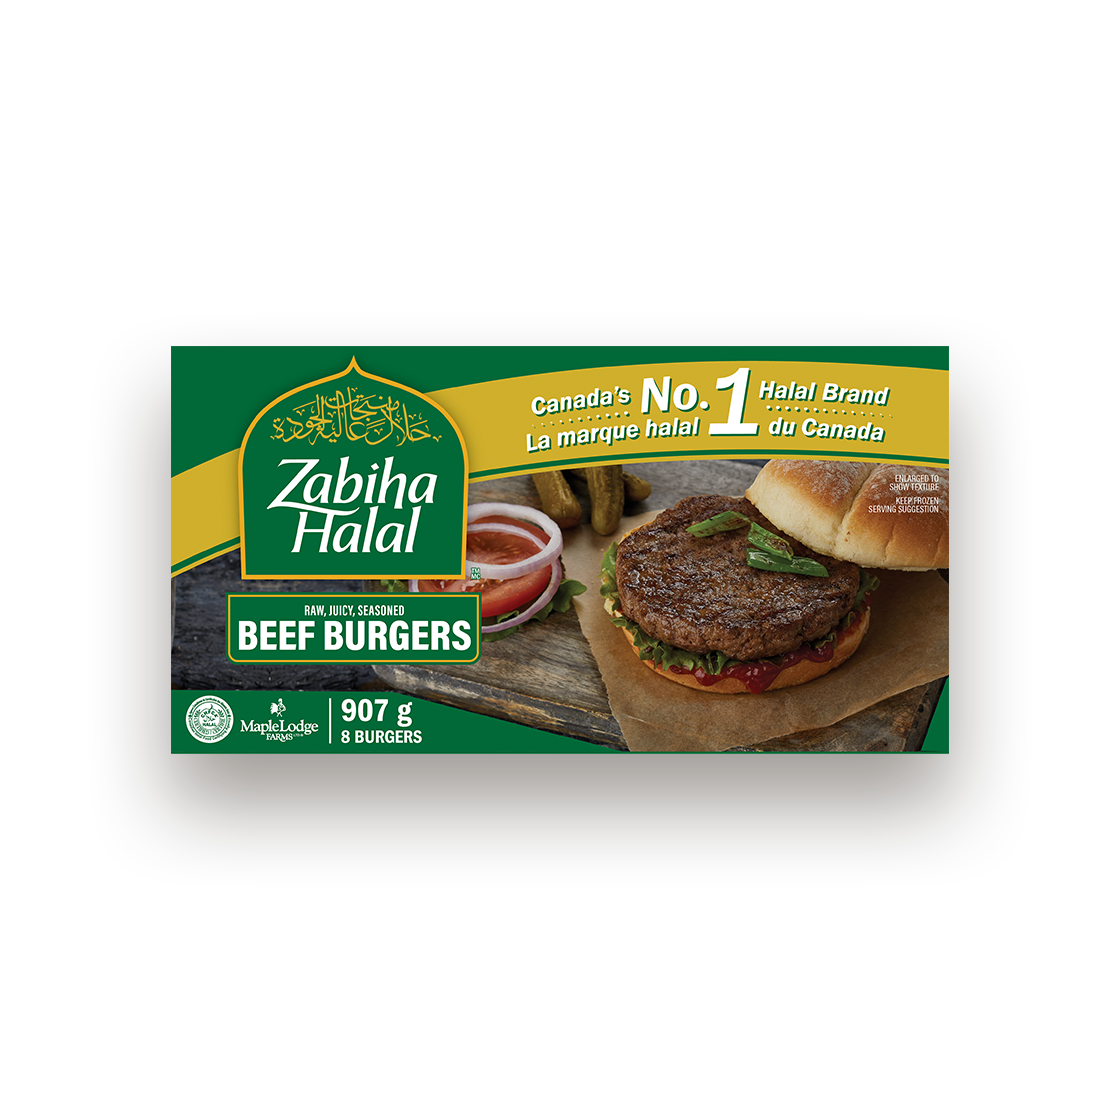 A package of frozen Beef Burgers